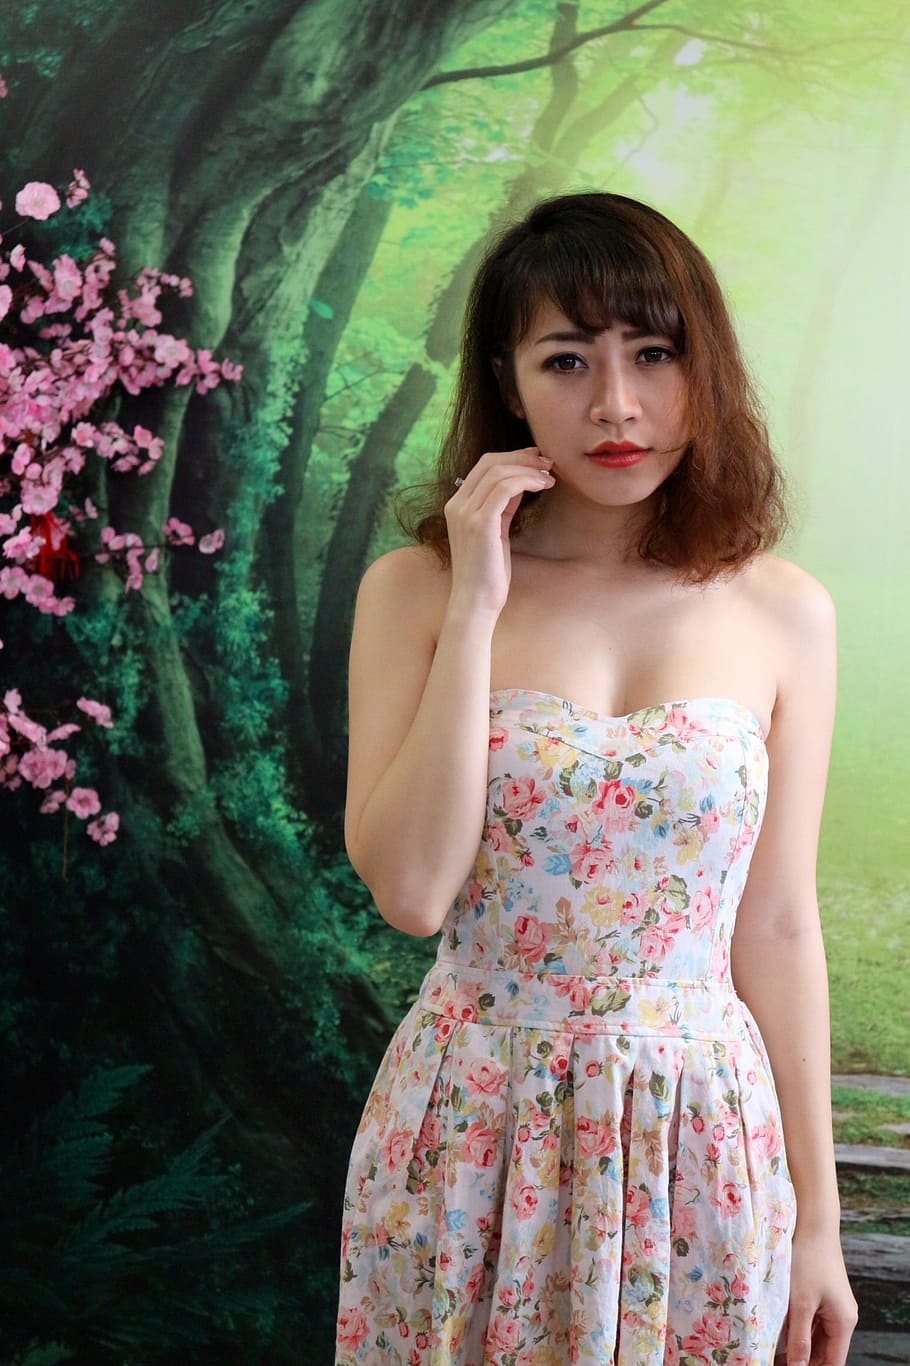 woman wearing white and multicolored floral strapless dress while standing near green tree wall painting